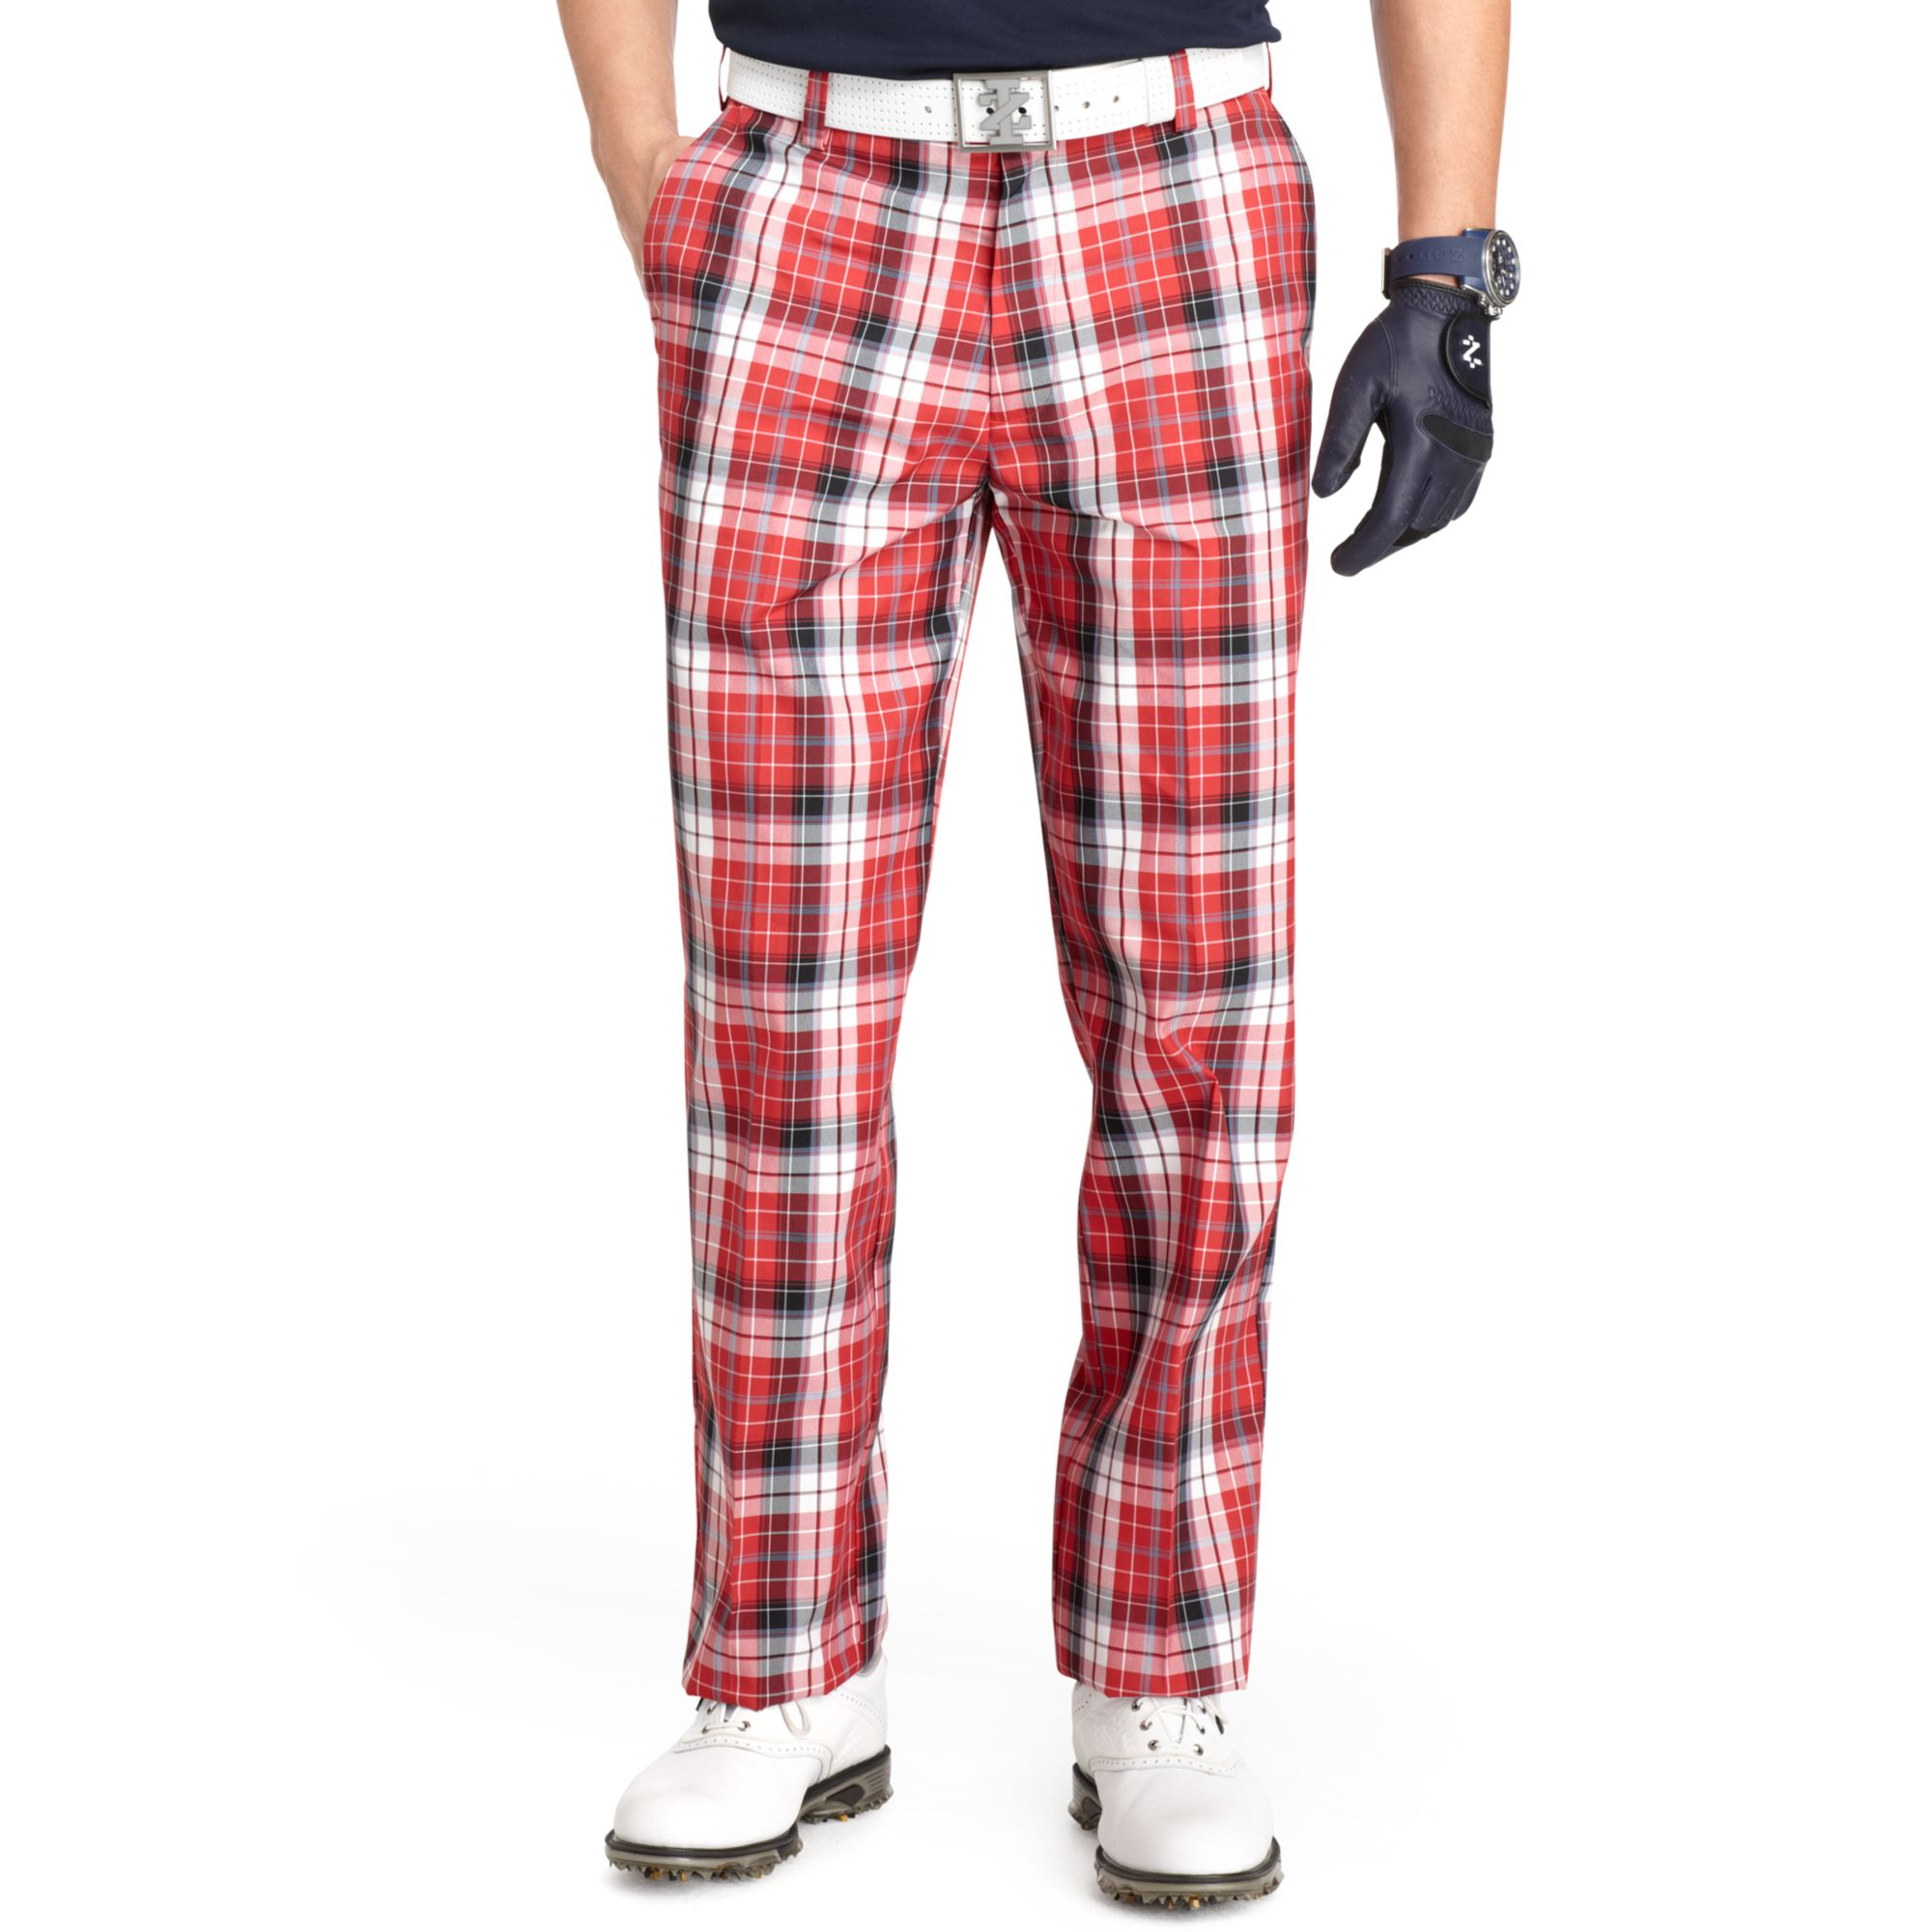 Lyst - Izod Flat Front Plaid Golf Pants in Red for Men